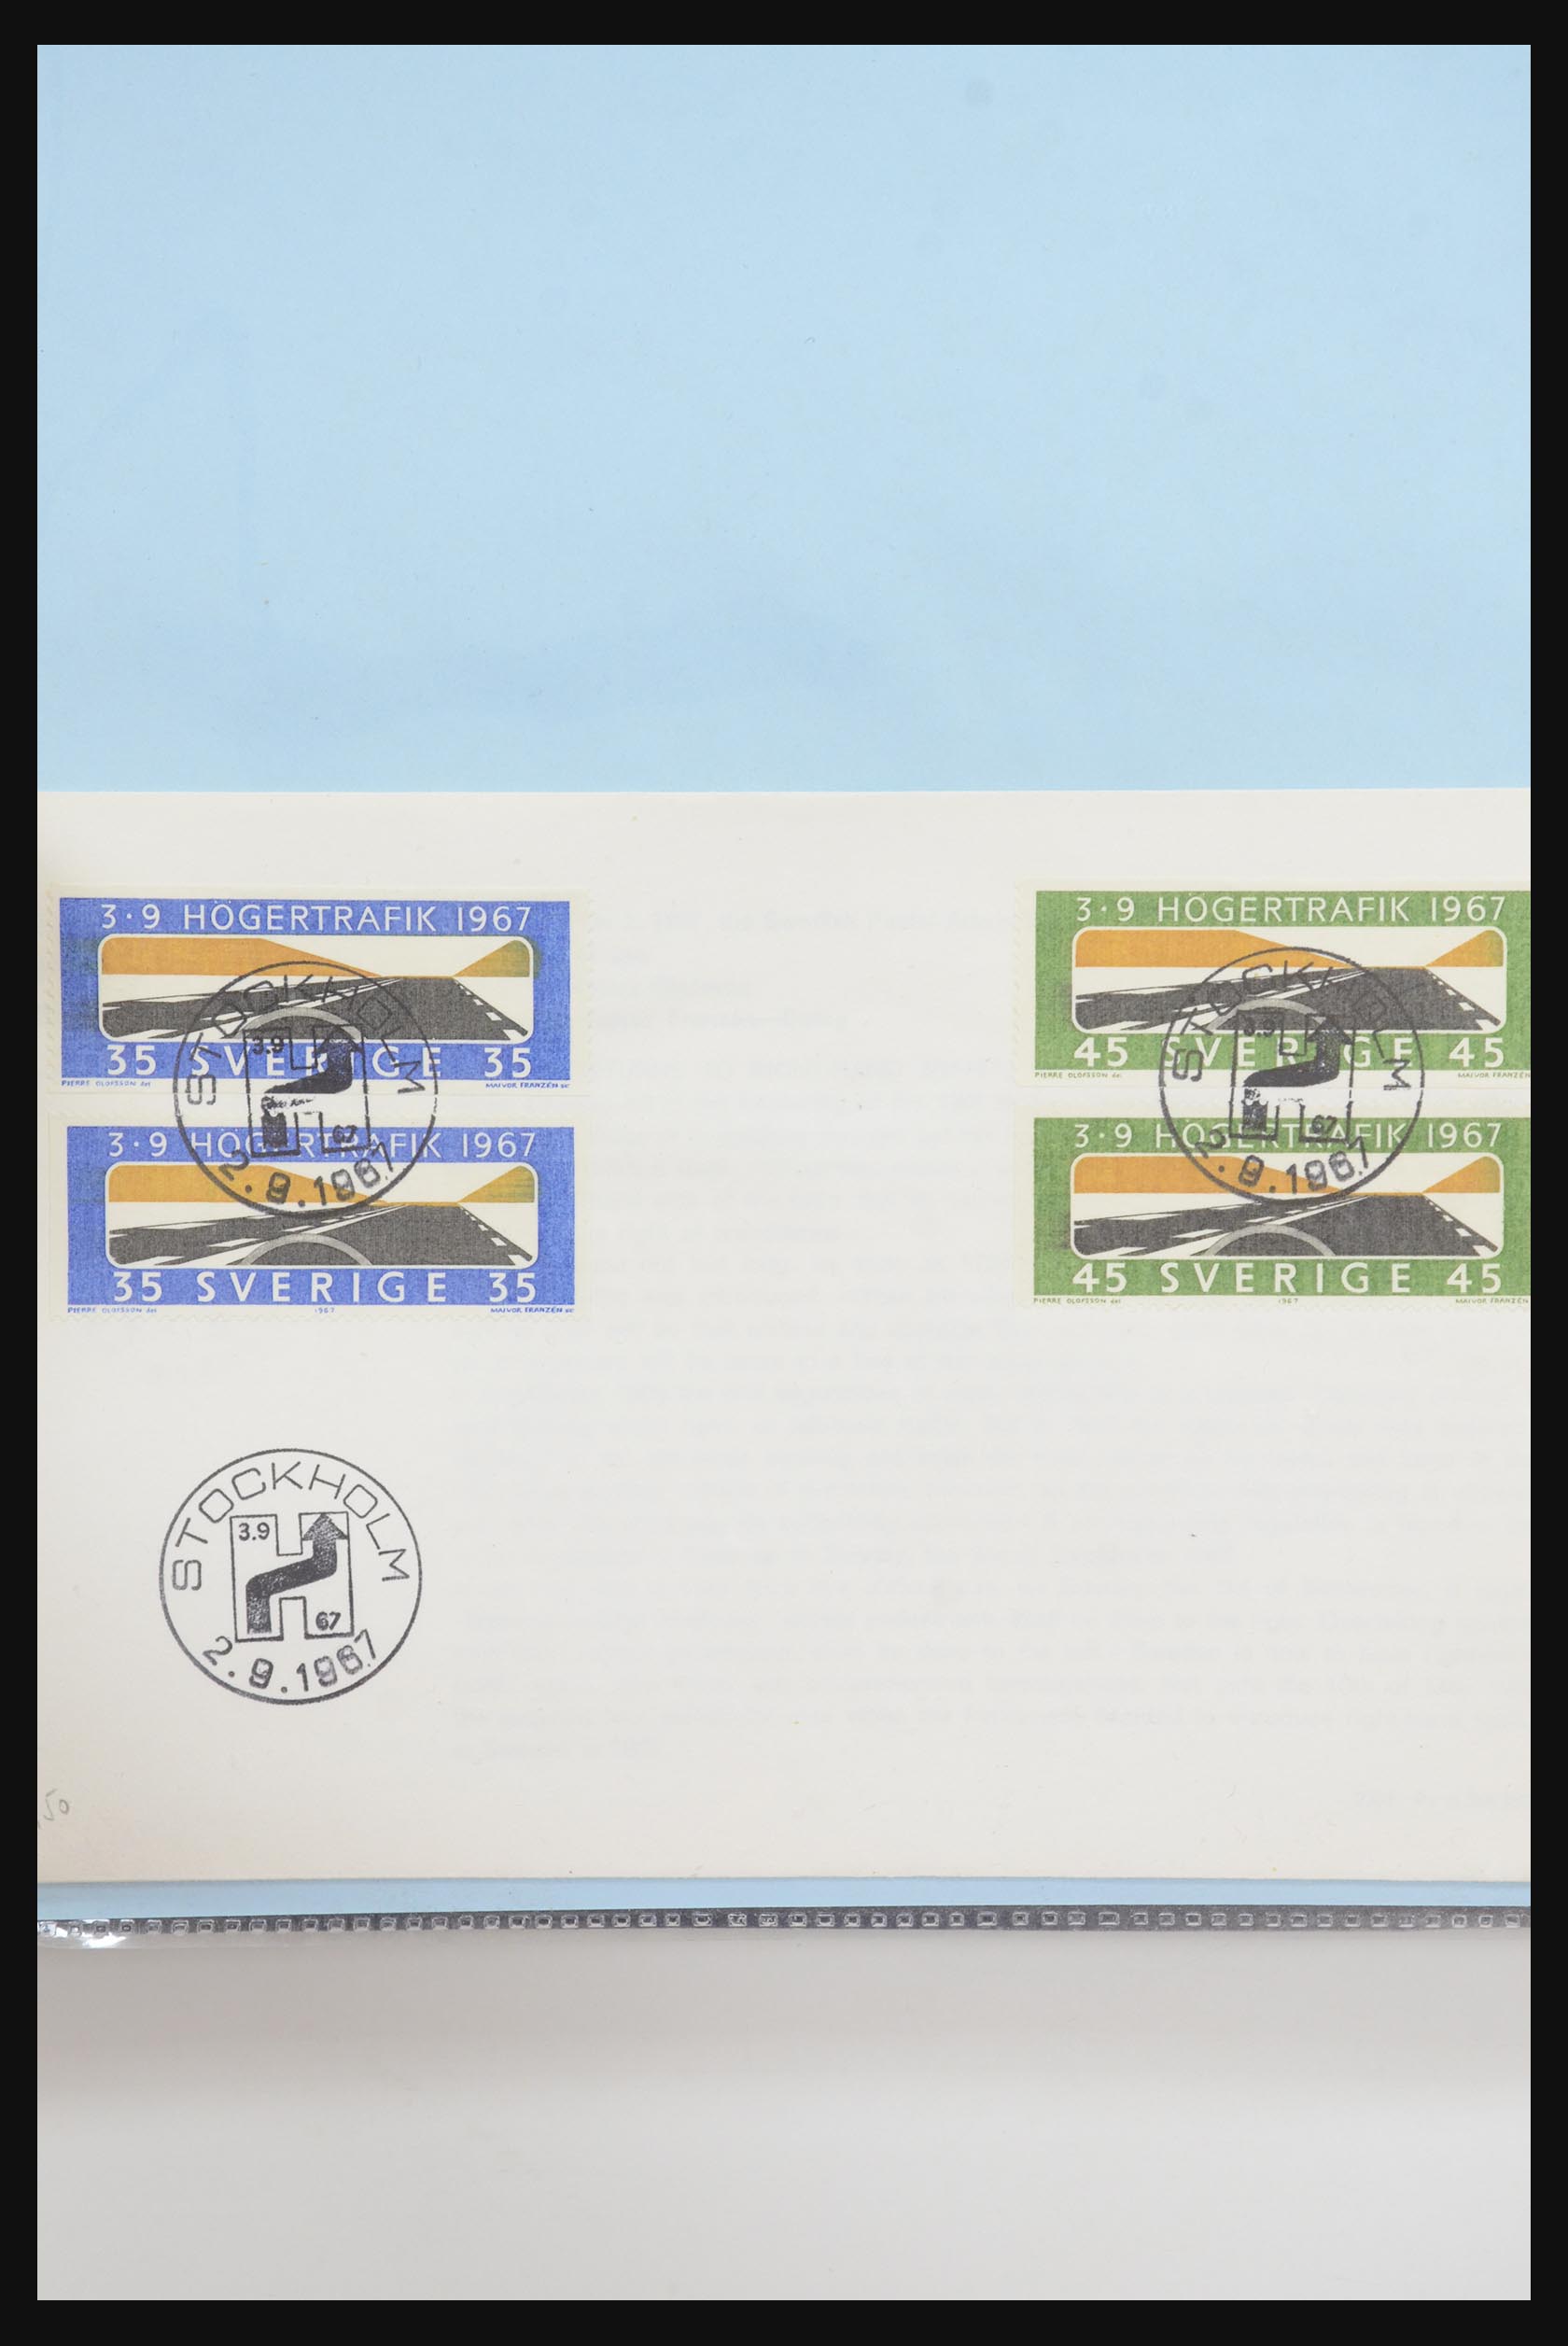 31915 102 - 31915 Western Europe souvenir sheets and stamp booklets on FDC.